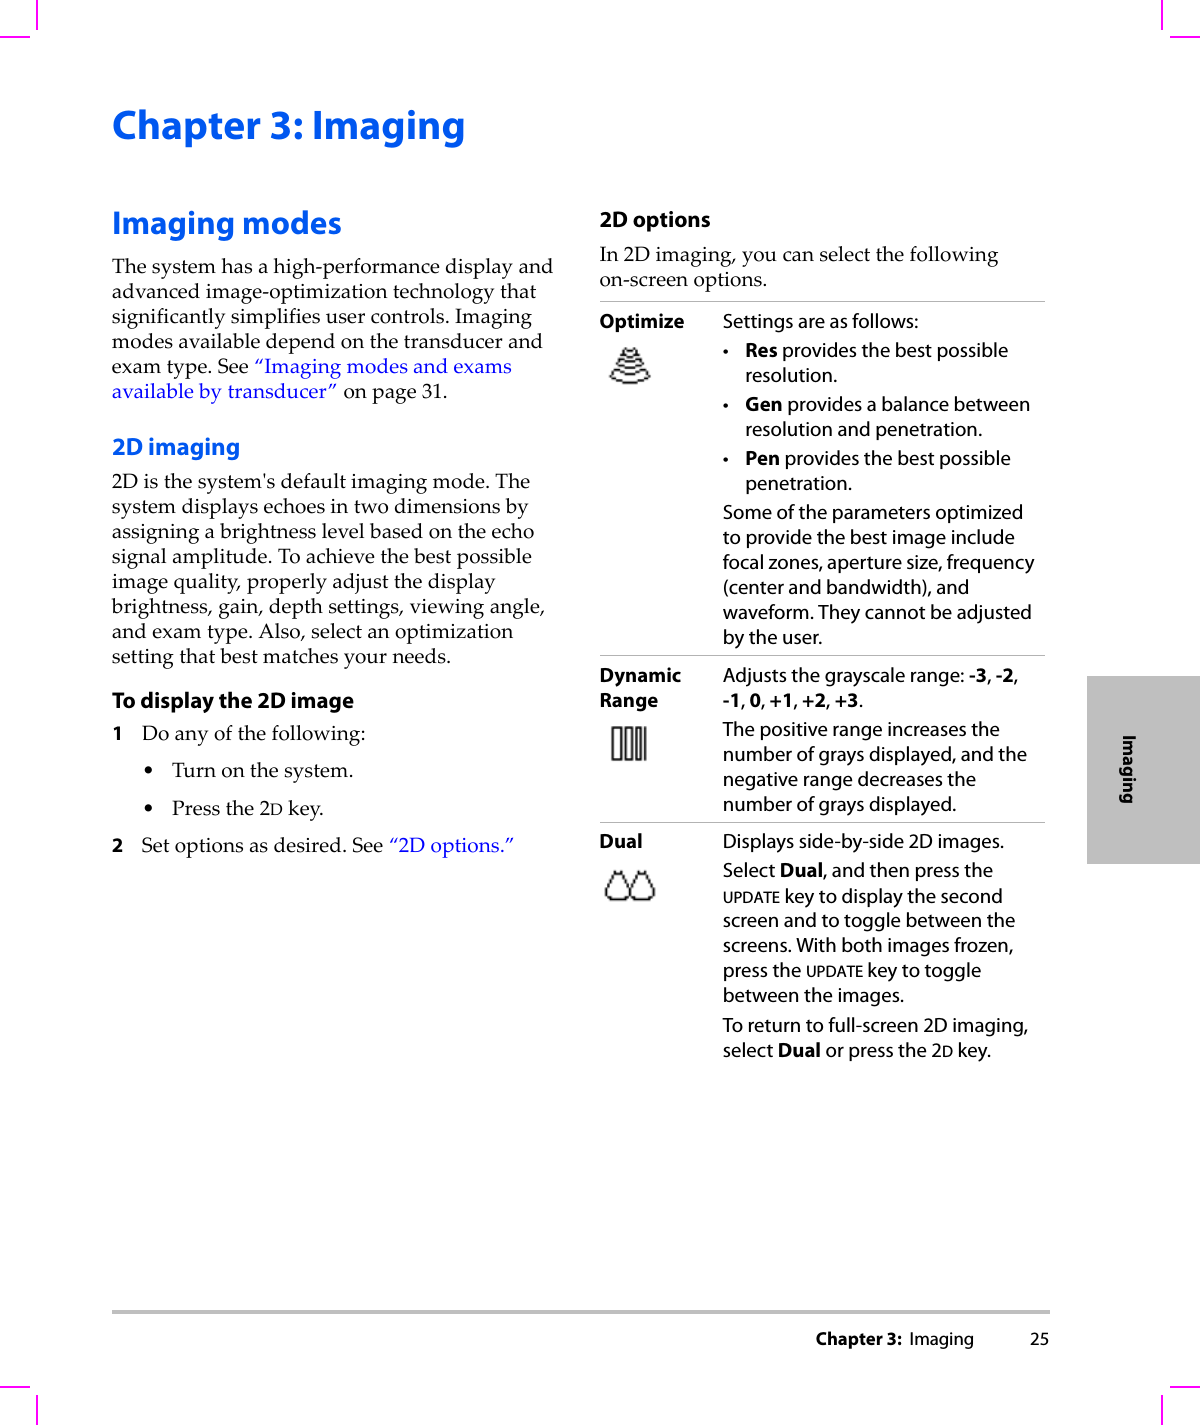 Chapter 3:  Imaging 25ImagingChapter 3: ImagingImaging modesThesystemhasahigh‐performancedisplayandadvancedimage‐optimizationtechnologythatsignificantlysimplifiesusercontrols.Imagingmodesavailabledependonthetransducerandexamtype.See“Imagingmodesandexamsavailablebytransducer”onpage 31.2D imaging2Disthesystemʹsdefaultimagingmode.Thesystemdisplaysechoesintwodimensionsbyassigningabrightnesslevelbasedontheechosignalamplitude.Toachievethebestpossibleimagequality,properlyadjustthedisplaybrightness,gain,depthsettings,viewingangle,andexamtype.Also,selectanoptimizationsettingthatbestmatchesyourneeds.To display the 2D image1Doanyofthefollowing:•Turnonthesystem.•Pressthe2Dkey.2Setoptionsasdesired.See“2Doptions.”2D optionsIn2Dimaging,youcanselectthefollowingon‐screenoptions.Optimize Settings are as follows:•Res provides the best possible resolution.•Gen provides a balance between resolution and penetration.•Pen provides the best possible penetration.Some of the parameters optimized to provide the best image include focal zones, aperture size, frequency (center and bandwidth), and waveform. They cannot be adjusted by the user.DynamicRangeAdjusts the grayscale range: -3, -2, -1, 0, +1, +2, +3. The positive range increases the number of grays displayed, and the negative range decreases the number of grays displayed.Dual Displays side-by-side 2D images.Select Dual, and then press the UPDATE key to display the second screen and to toggle between the screens. With both images frozen, press the UPDATE key to toggle between the images.To return to full-screen 2D imaging, select Dual or press the 2D key.